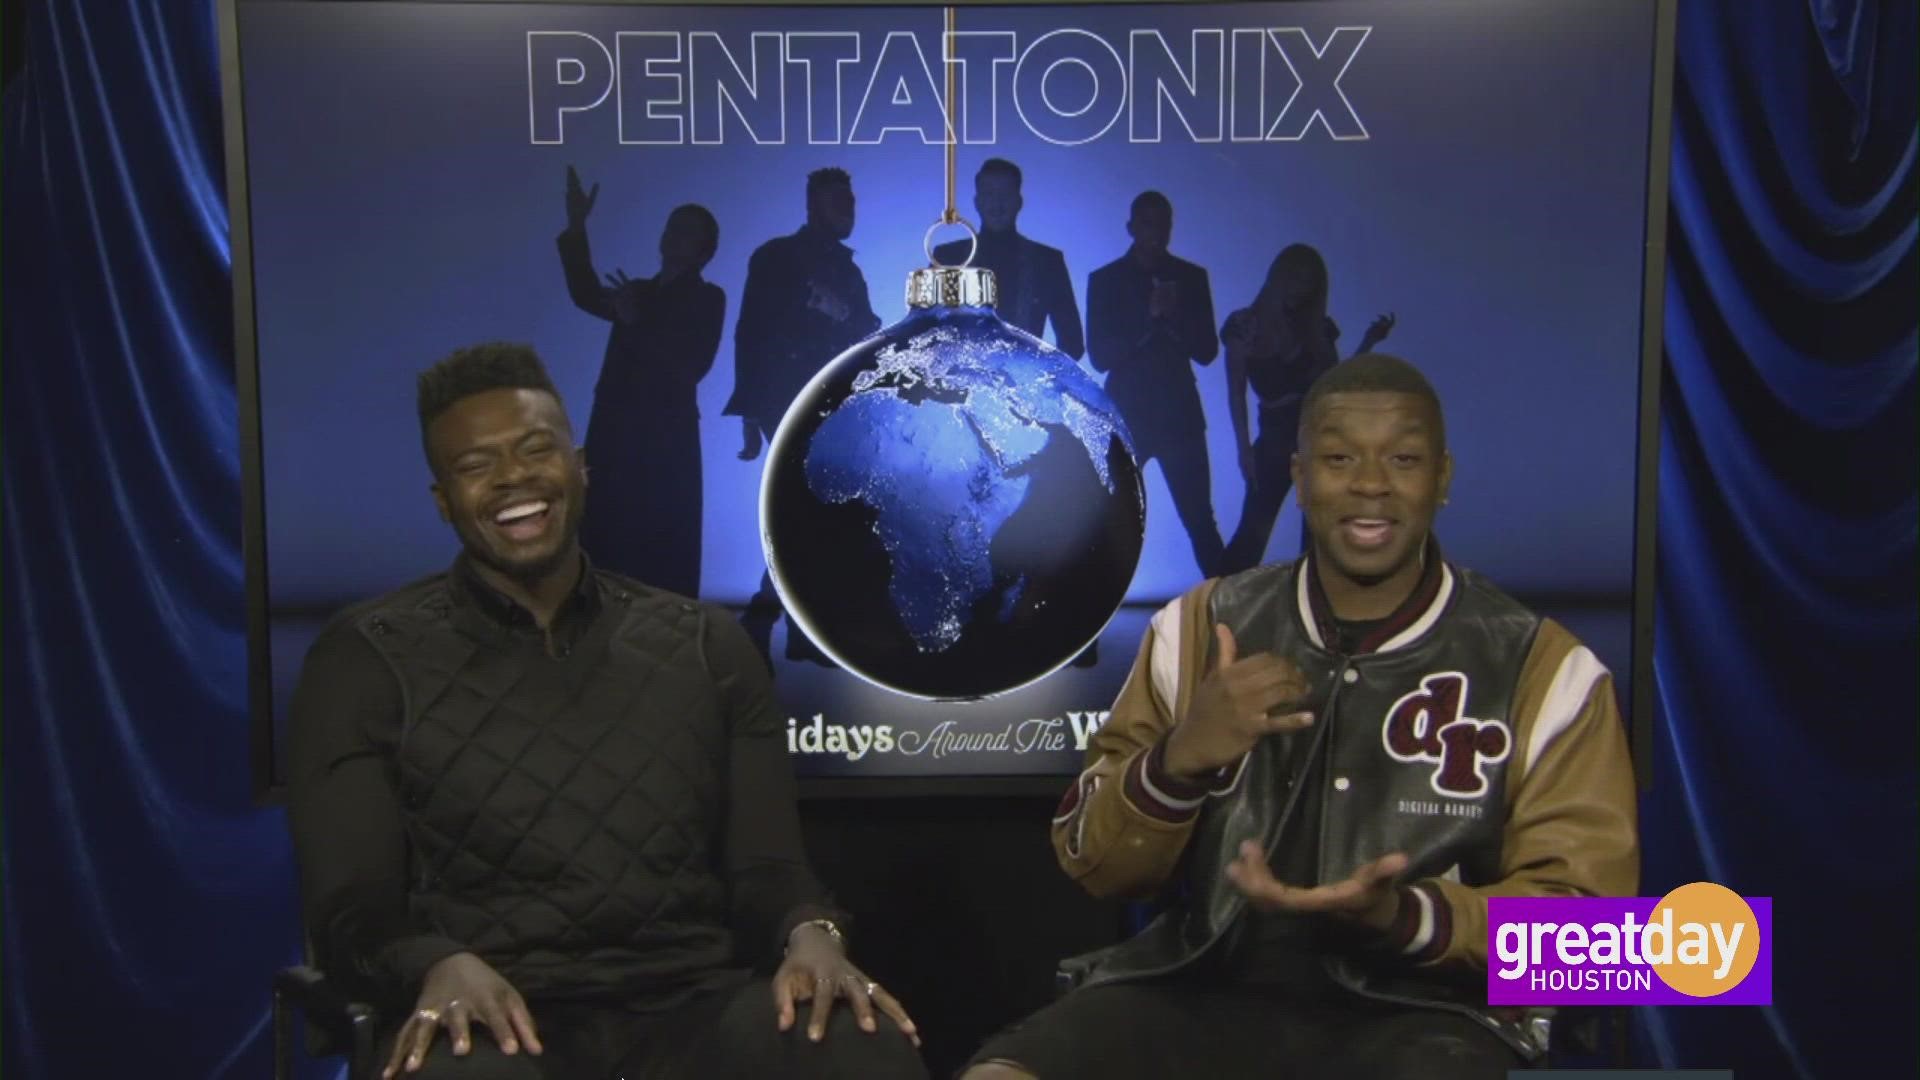 Pentatonix members Kevin Olusola and Matt Sallee discuss their upcoming holiday album, "Holidays Around the World"